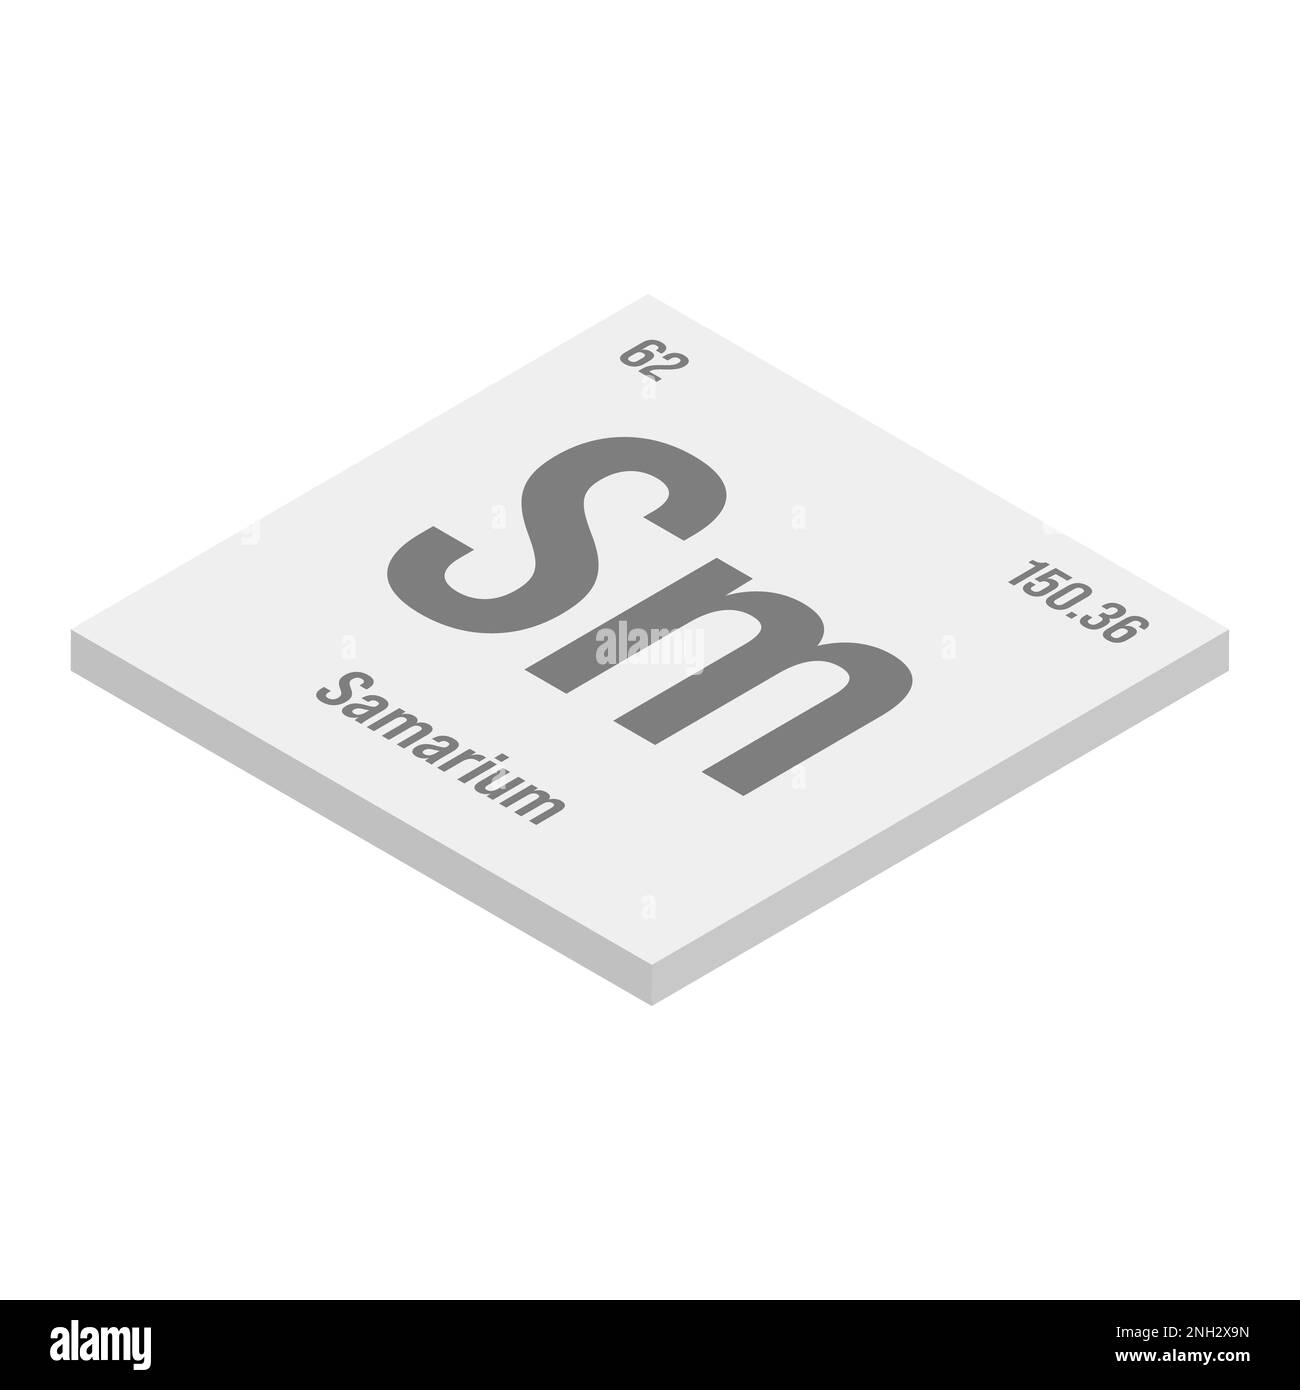 Samarium, Sm, gray 3D isometric illustration of periodic table element with name, symbol, atomic number and weight. Rare earth metal with various industrial uses, such as in magnets, lighting, and as a component in certain types of glass. Stock Vector